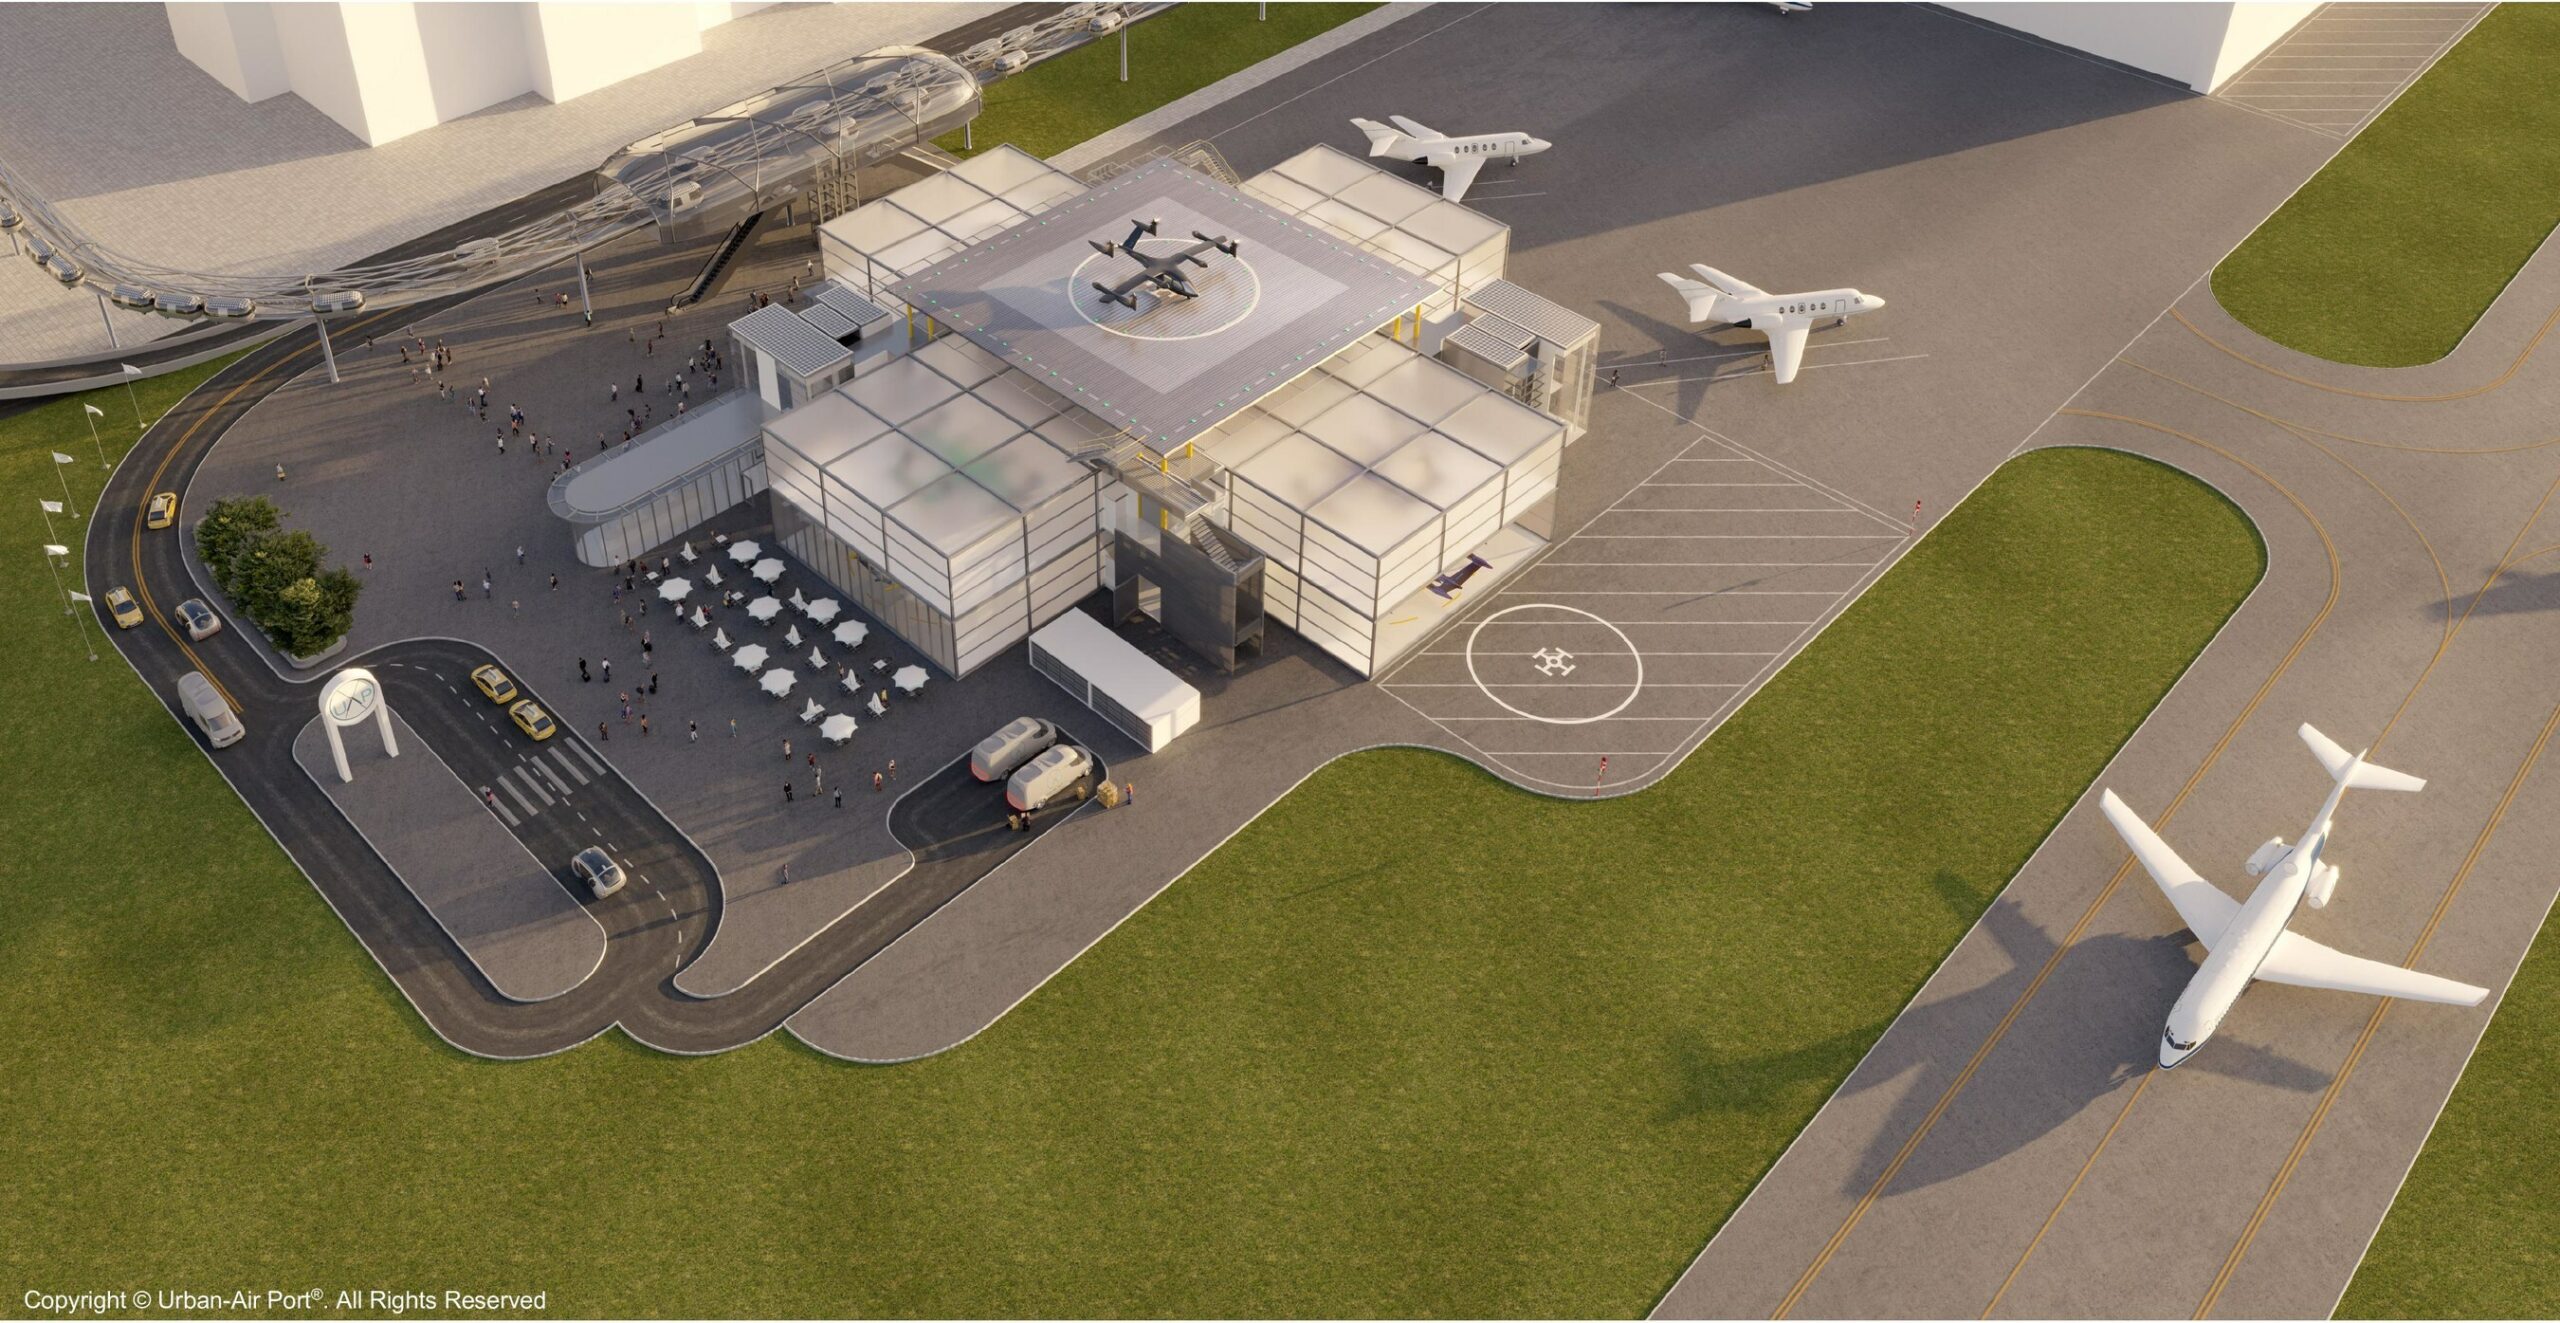 Visualisation of Urban-Air Port’s Next-Generation AirOne Vertiport at an airport location